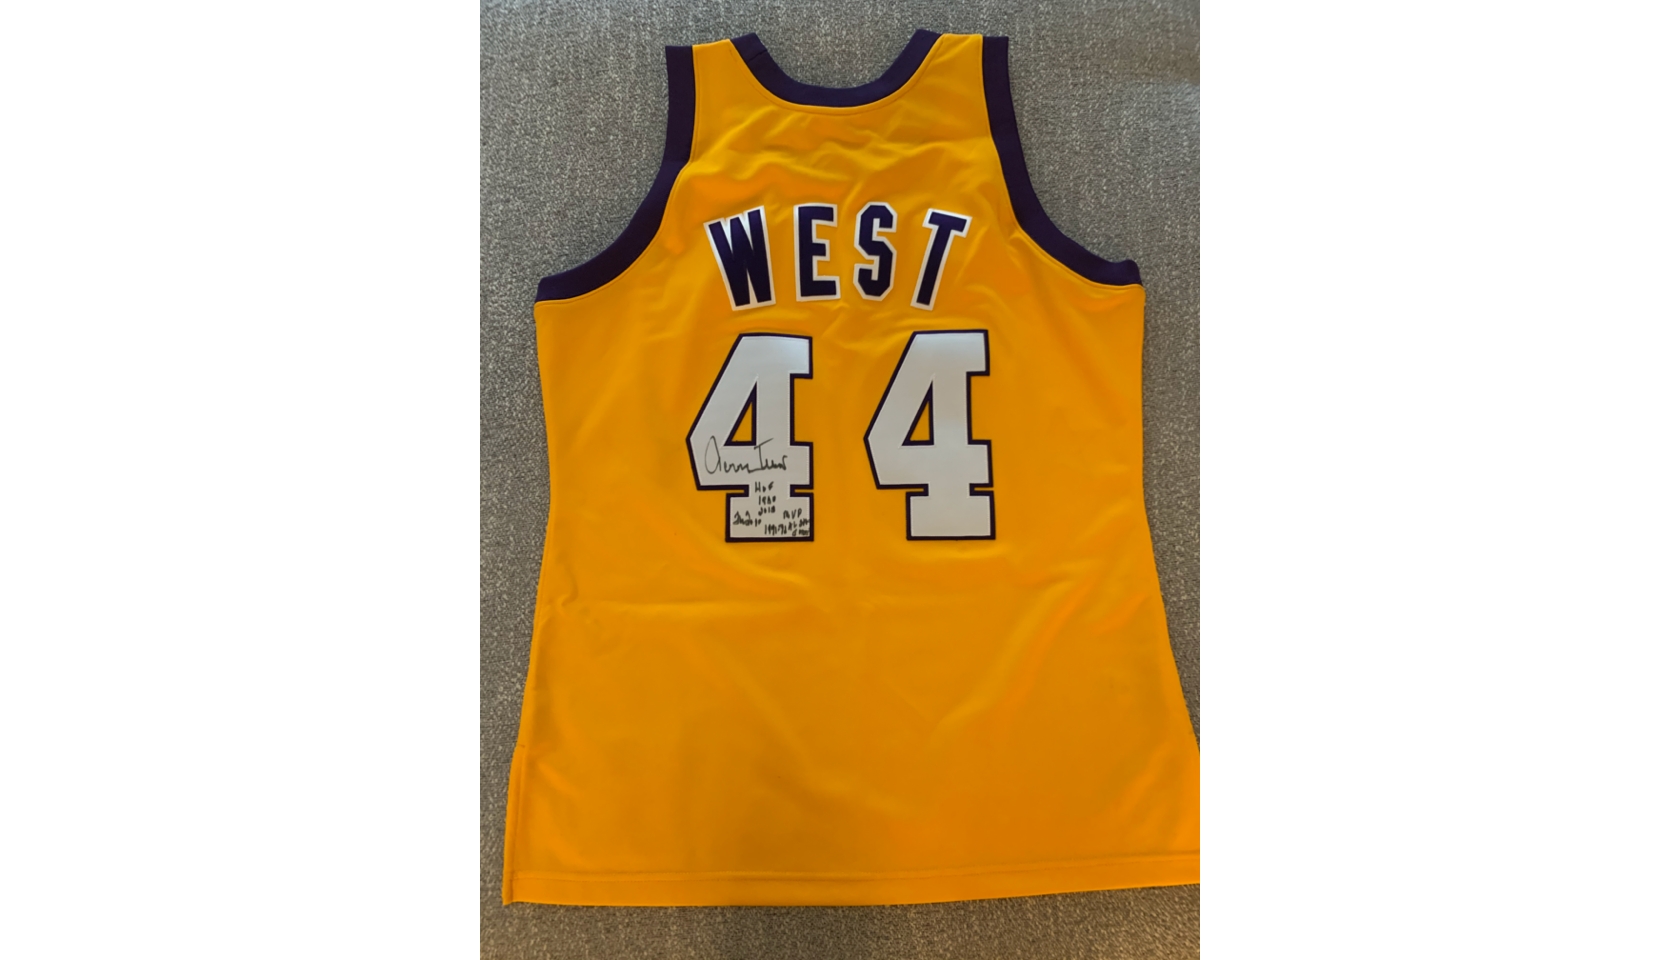 Jerry West Blue/Yellow Minneapolis Lakers Autographed Jersey – Minnesota  Awesome